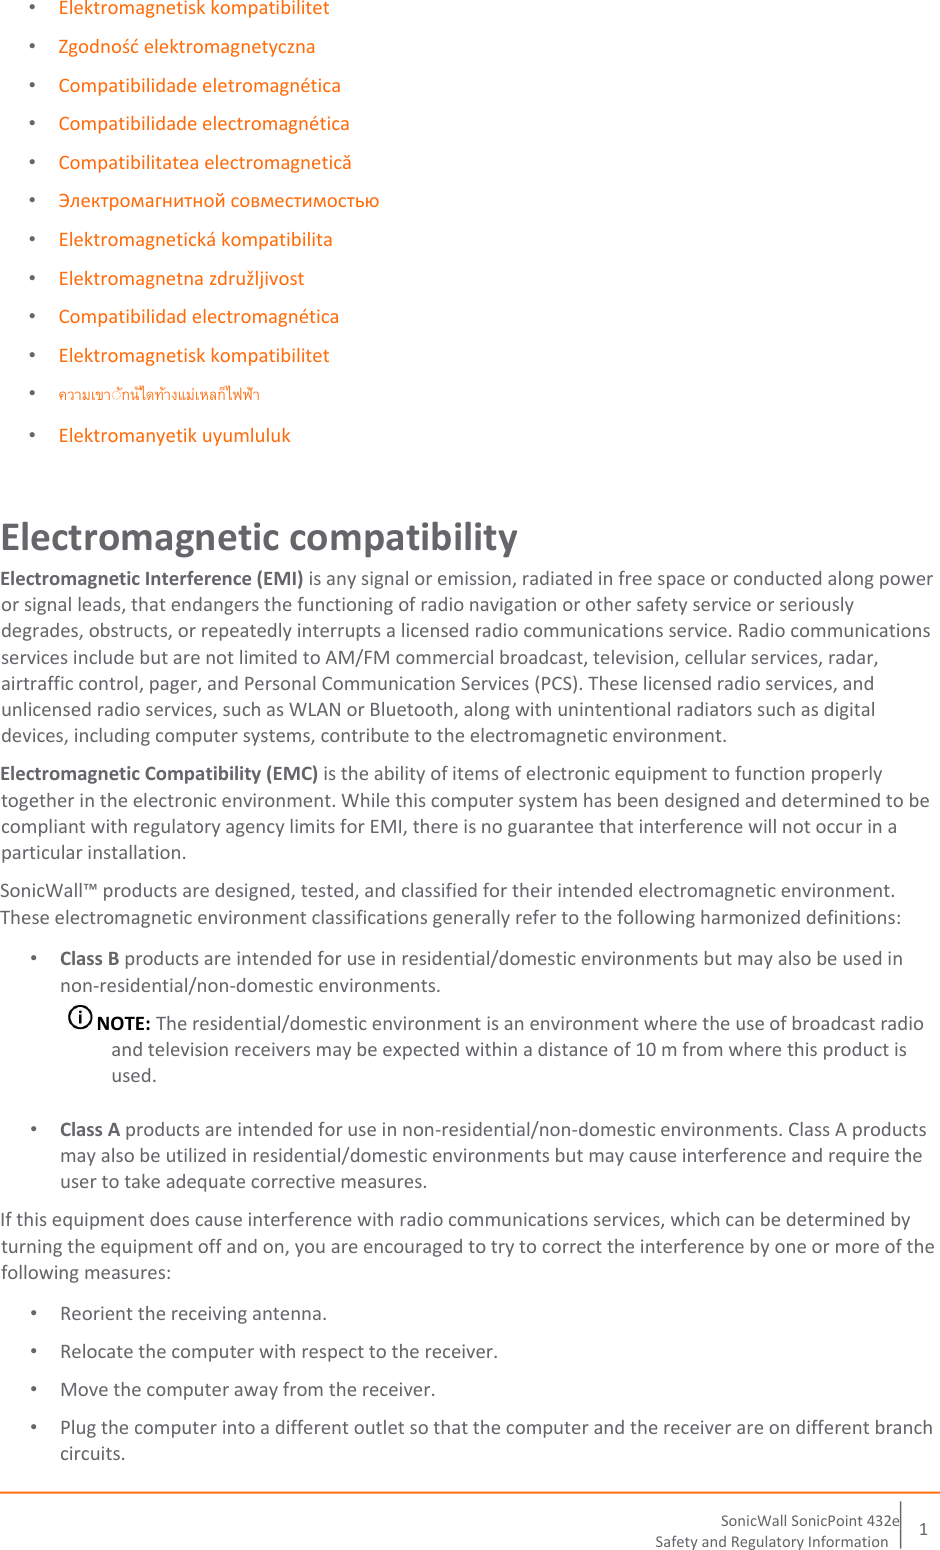      SonicWall   Soni cPoint 432e   15   Safety and Regulatory Information   • Elektromagnetisk kompatibilitet  • Zgodność elektromagnetyczna  • Compatibilidade eletromagnética  • Compatibilidade electromagnética  • Compatibilitatea electromagnetică  • Электромагнитной совместимостью  • Elektromagnetická kompatibilita  • Elektromagnetna združljivost  • Compatibilidad electromagnética  • Elektromagnetisk kompatibilitet  •   • Elektromanyetik uyumluluk  Electromagnetic compatibility  Electromagnetic Interference (EMI) is any signal or emission, radiated in free space or conducted along power or signal leads, that endangers the functioning of radio navigation or other safety service or seriously degrades, obstructs, or repeatedly interrupts a licensed radio communications service. Radio communications services include but are not limited to AM/FM commercial broadcast, television, cellular services, radar, airtraffic control, pager, and Personal Communication Services (PCS). These licensed radio services, and unlicensed radio services, such as WLAN or Bluetooth, along with unintentional radiators such as digital devices, including computer systems, contribute to the electromagnetic environment.  Electromagnetic Compatibility (EMC) is the ability of items of electronic equipment to function properly together in the electronic environment. While this computer system has been designed and determined to be compliant with regulatory agency limits for EMI, there is no guarantee that interference will not occur in a particular installation.   SonicWall™ products are designed, tested, and classified for their intended electromagnetic environment.  These electromagnetic environment classifications generally refer to the following harmonized definitions:  • Class B products are intended for use in residential/domestic environments but may also be used in non-residential/non-domestic environments.   NOTE: The residential/domestic environment is an environment where the use of broadcast radio and television receivers may be expected within a distance of 10 m from where this product is used.  • Class A products are intended for use in non-residential/non-domestic environments. Class A products may also be utilized in residential/domestic environments but may cause interference and require the user to take adequate corrective measures.  If this equipment does cause interference with radio communications services, which can be determined by turning the equipment off and on, you are encouraged to try to correct the interference by one or more of the following measures:  • Reorient the receiving antenna.  • Relocate the computer with respect to the receiver.  • Move the computer away from the receiver.  • Plug the computer into a different outlet so that the computer and the receiver are on different branch circuits.  